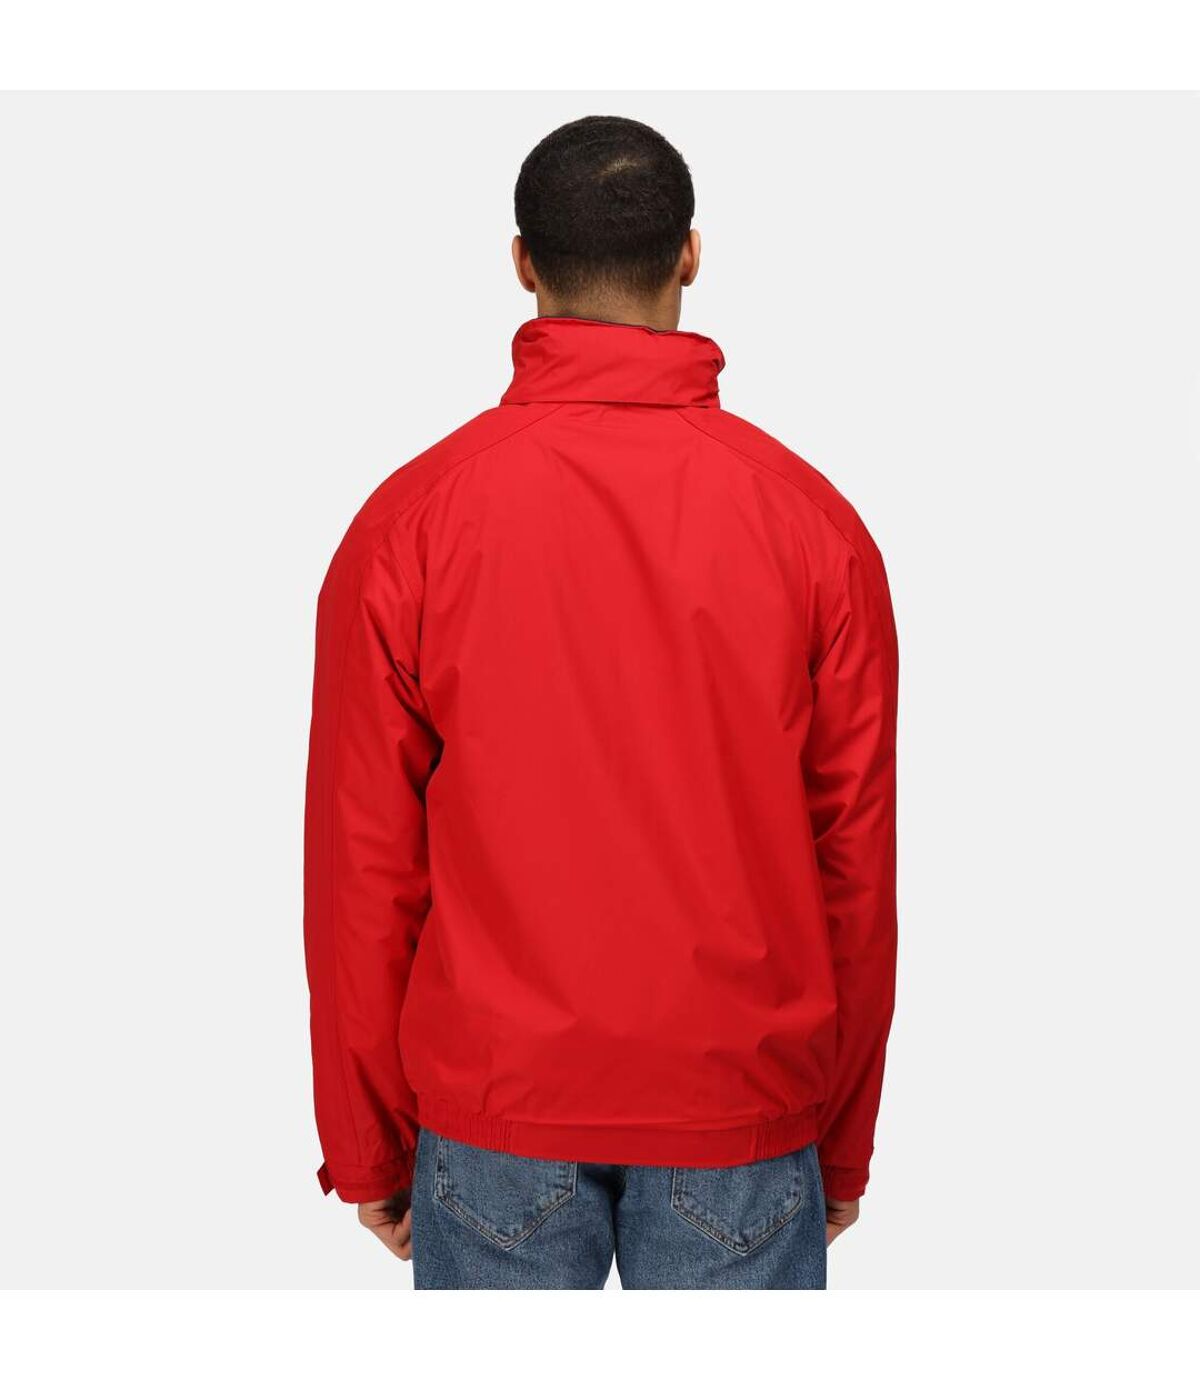 Regatta Dover Waterproof Windproof Jacket (Thermo-Guard Insulation) (Classic Red/Navy)